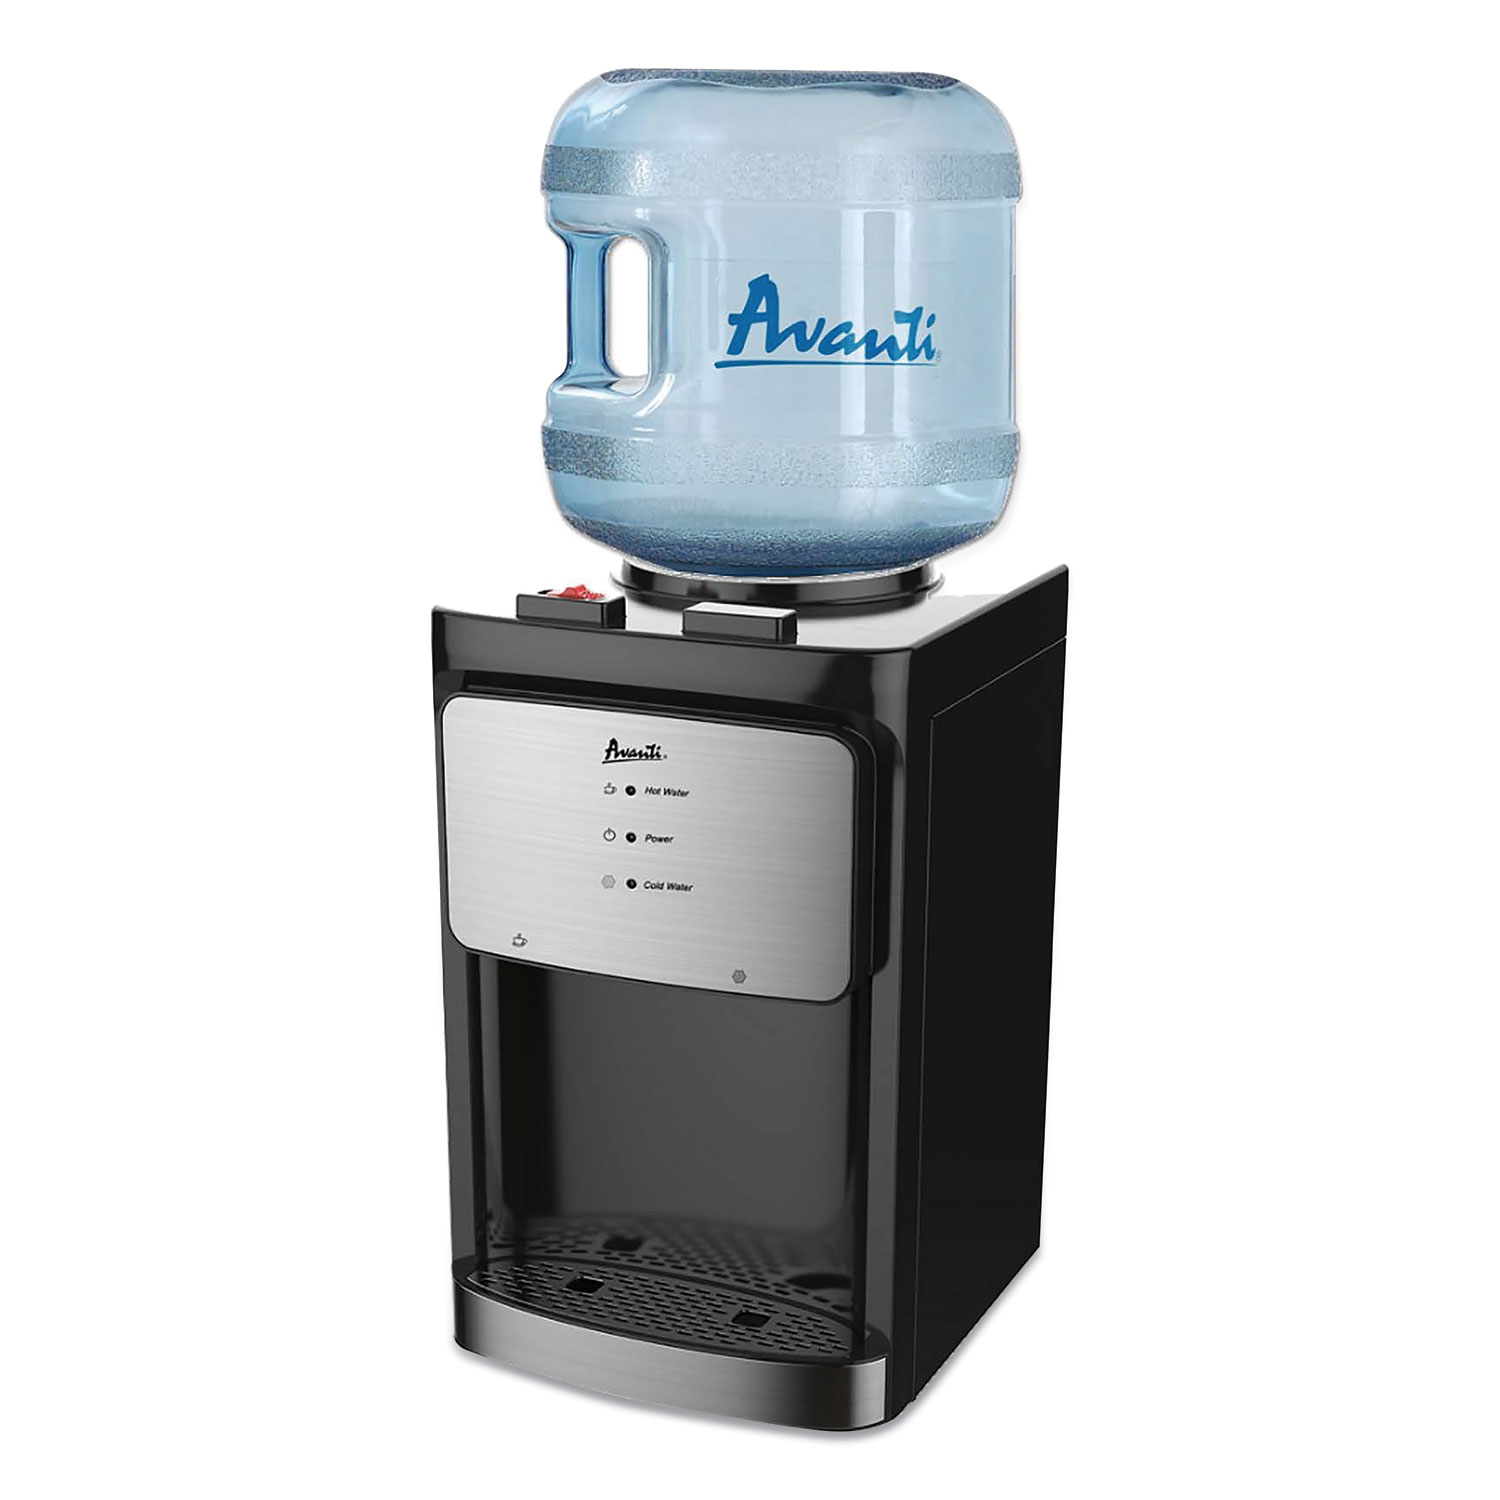 Avanti Counter Top Thermoelectric Hot and Cold Water Dispenser, 3 to 5 gal, 12 x 13 x 20, Black